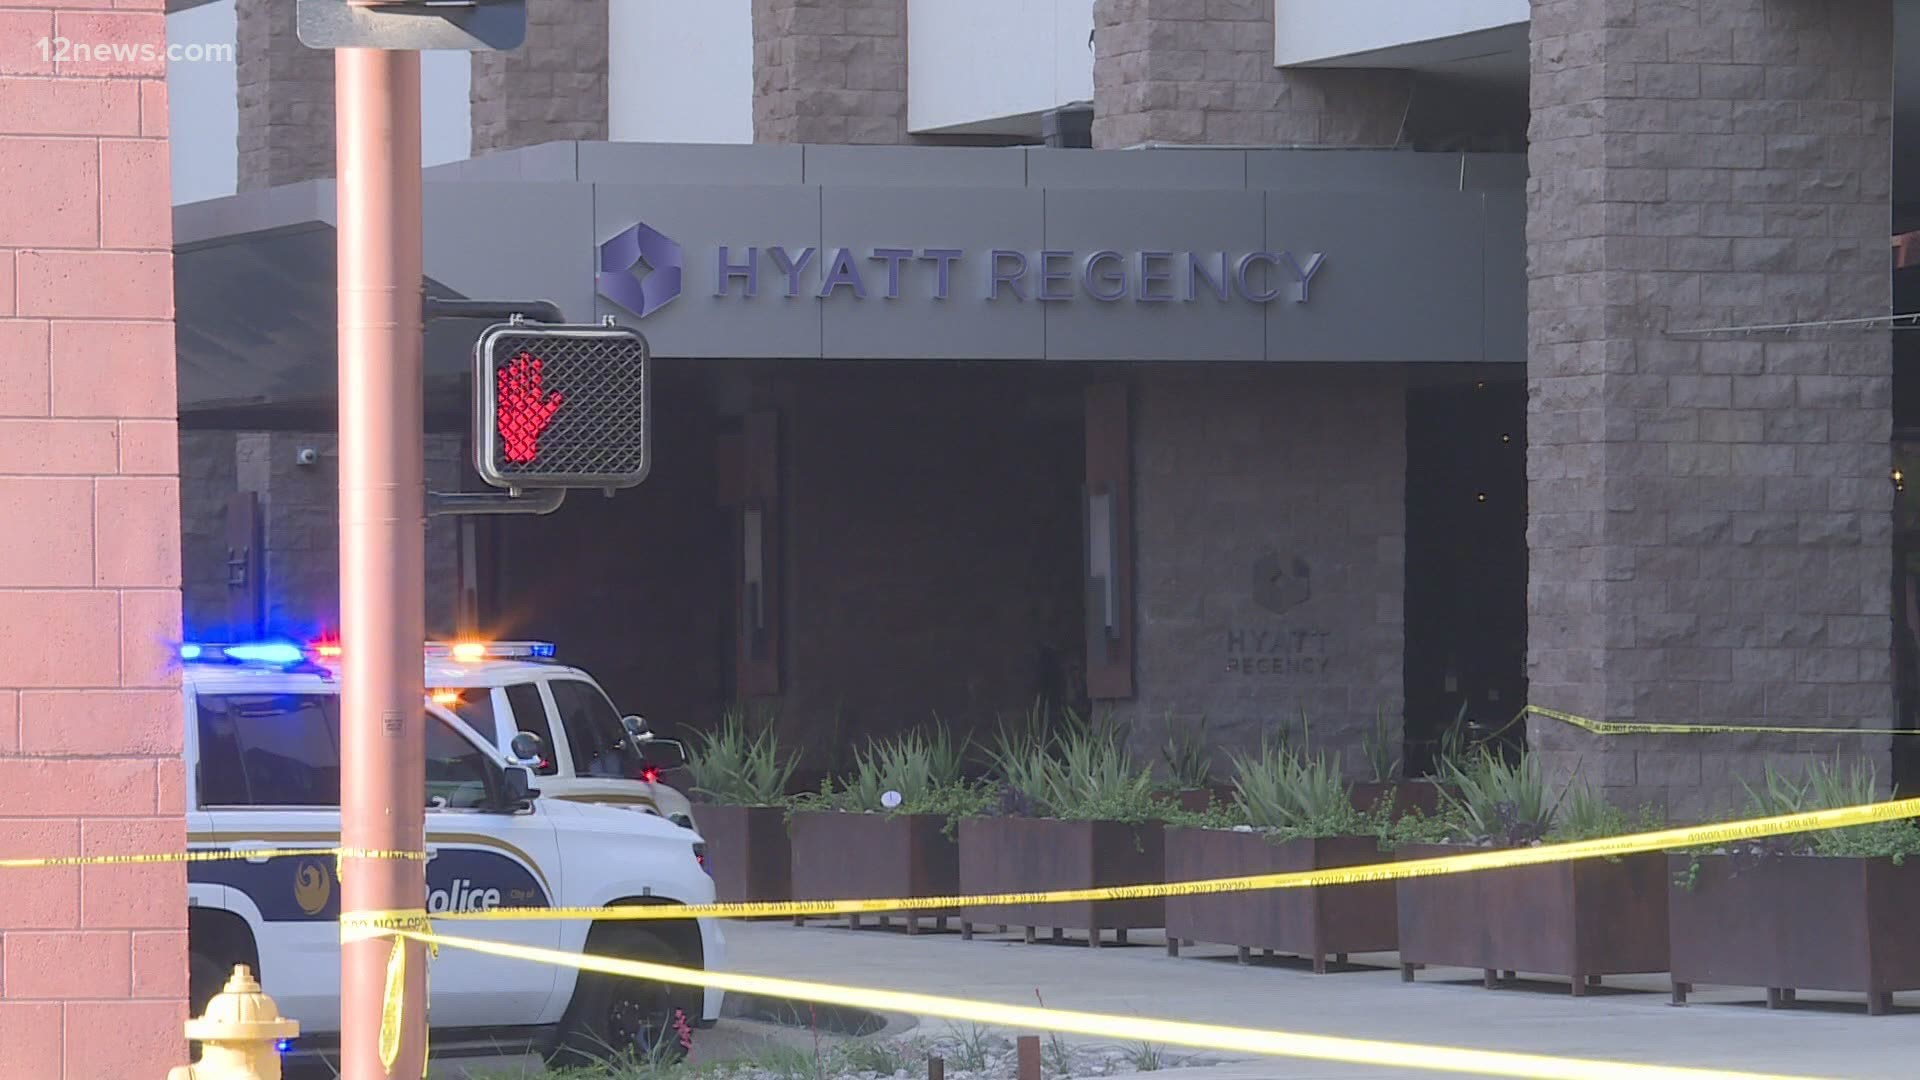 Police officers found a man dead and seven other people with gunshot injuries inside one of downtown Phoenix's largest hotels early Sunday morning, officials said.